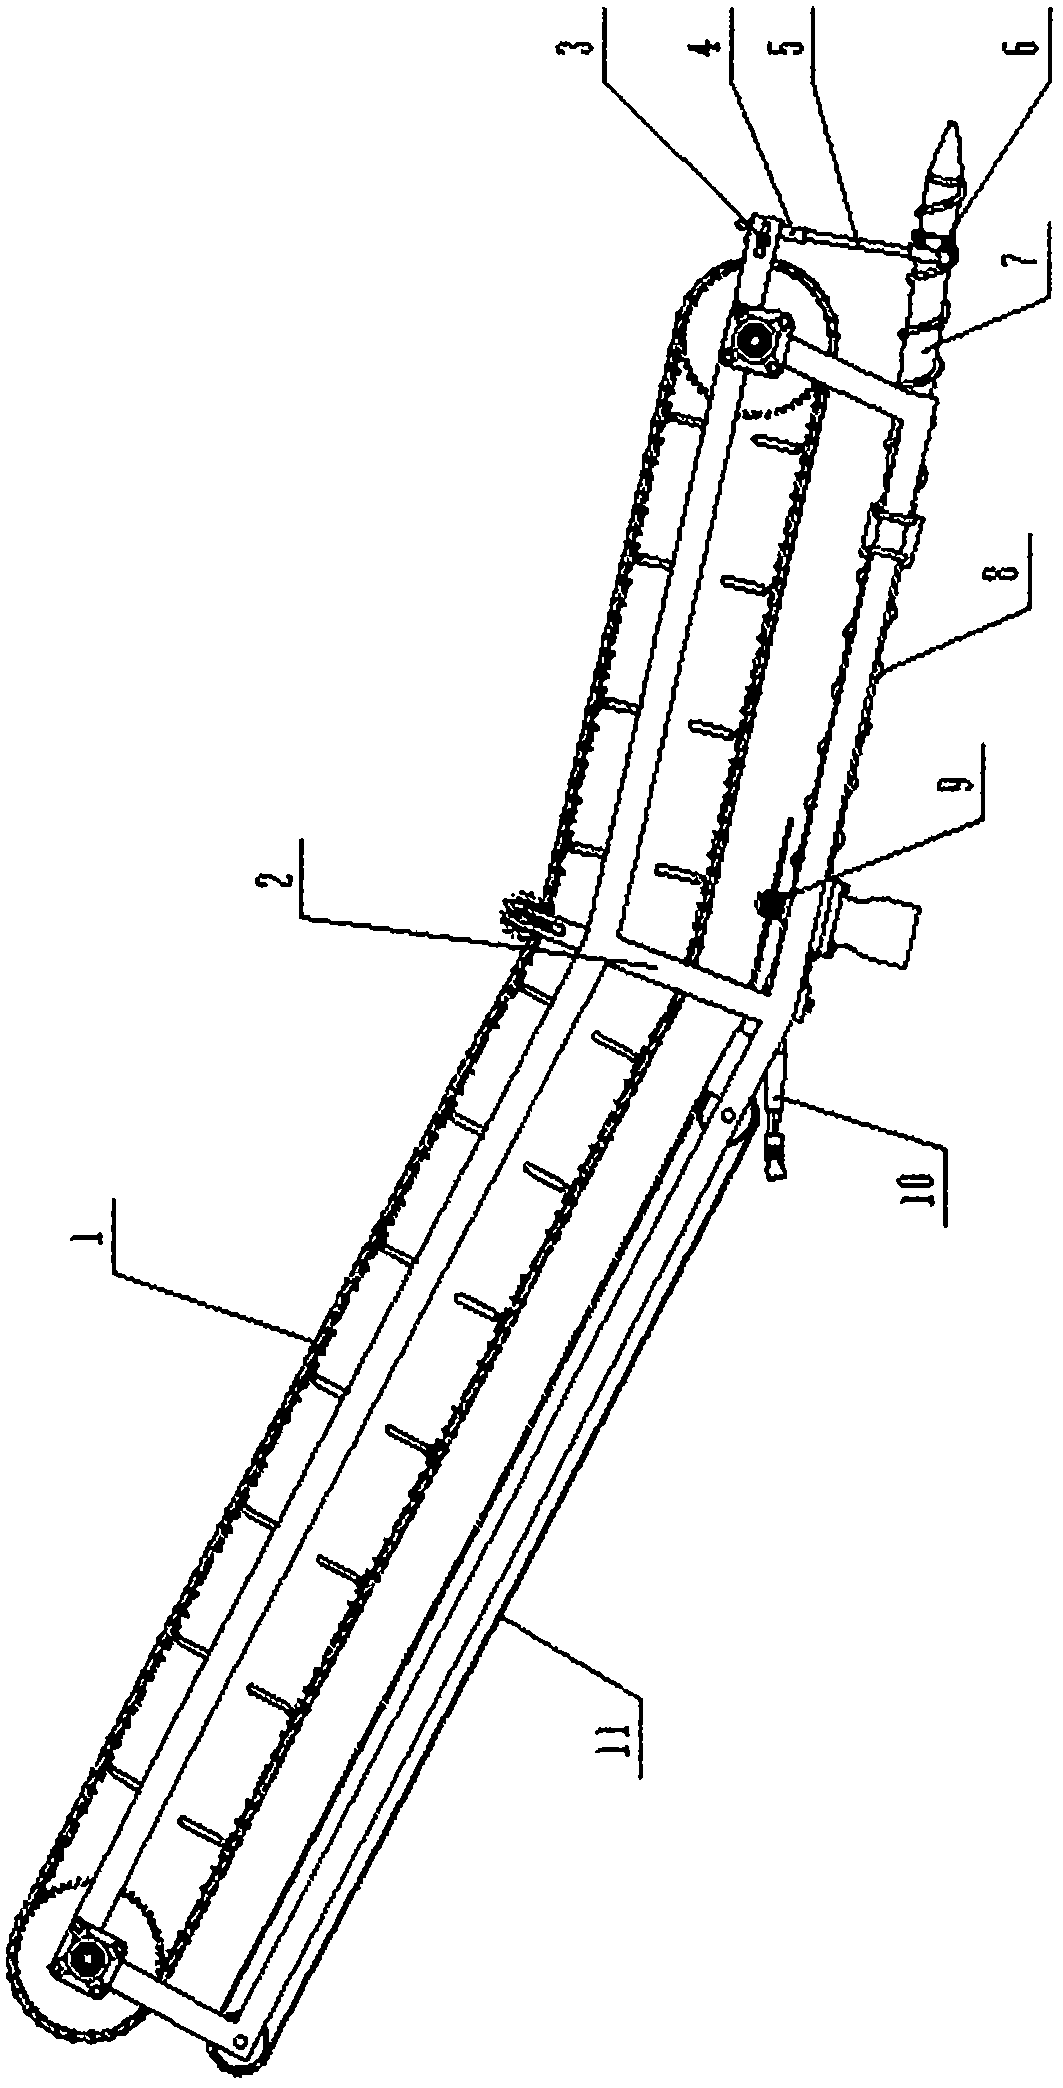 Cabbage harvesting and conveying table